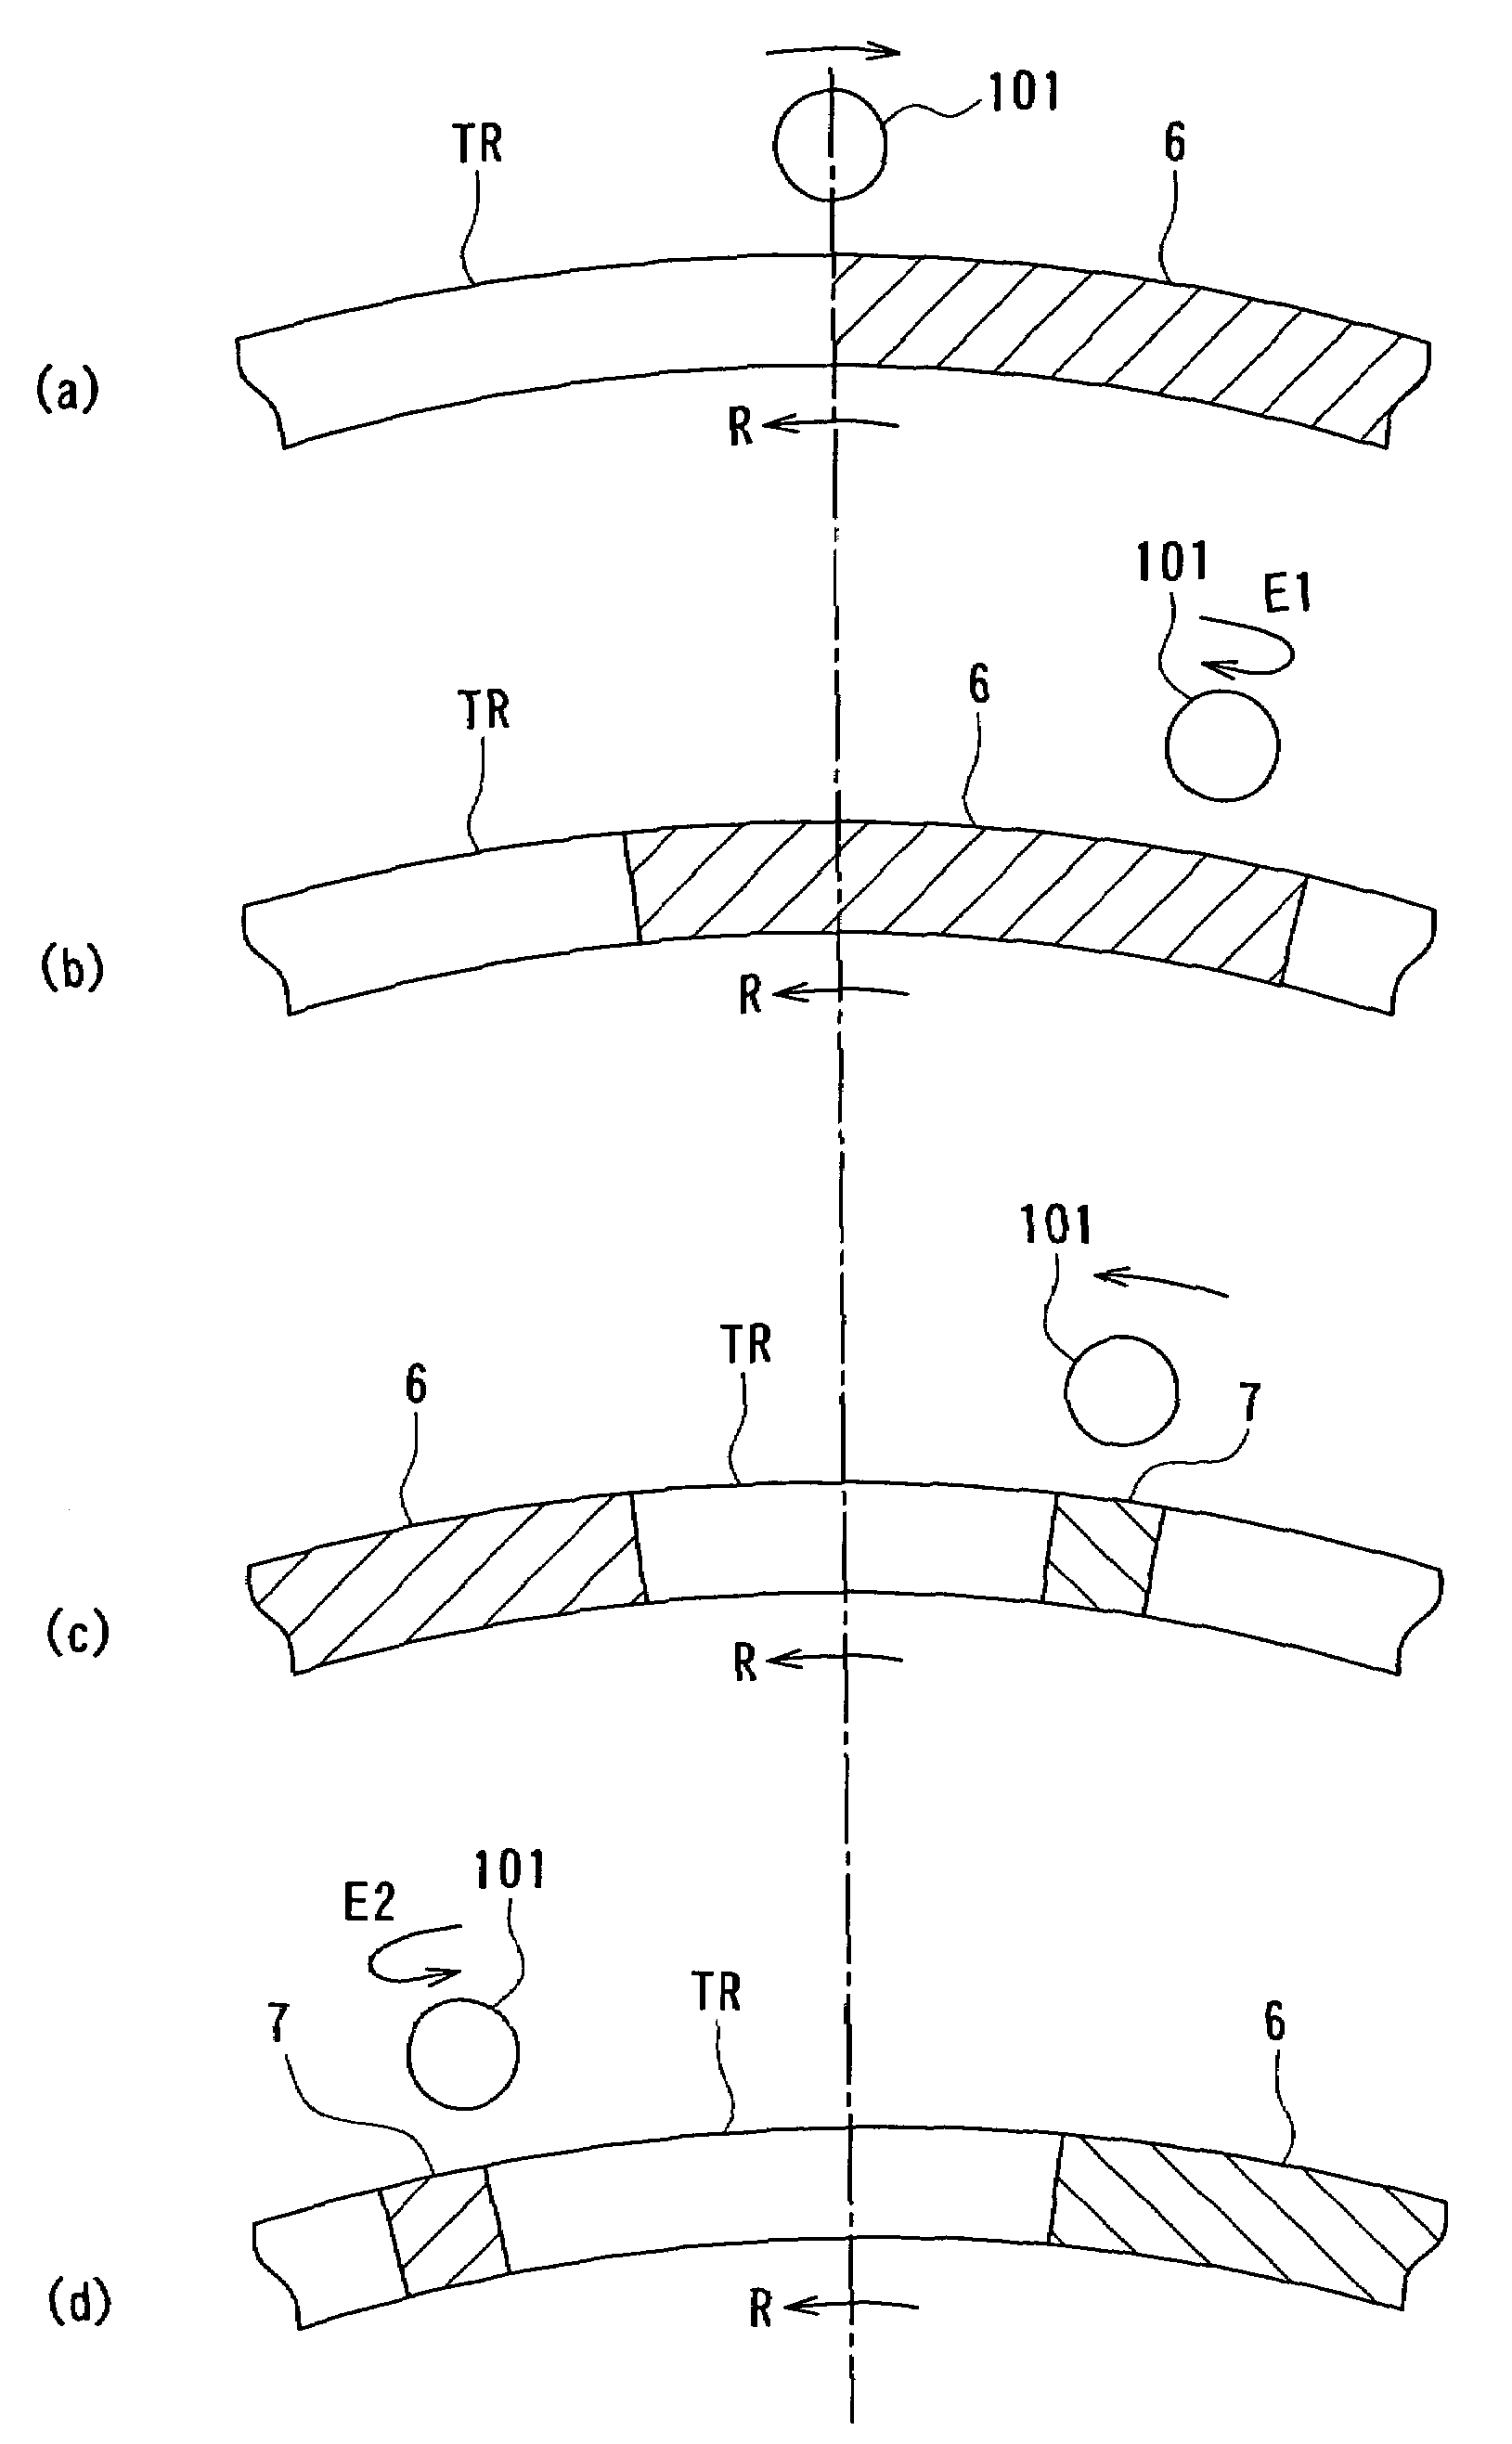 Optical information recording apparatus and method using holography